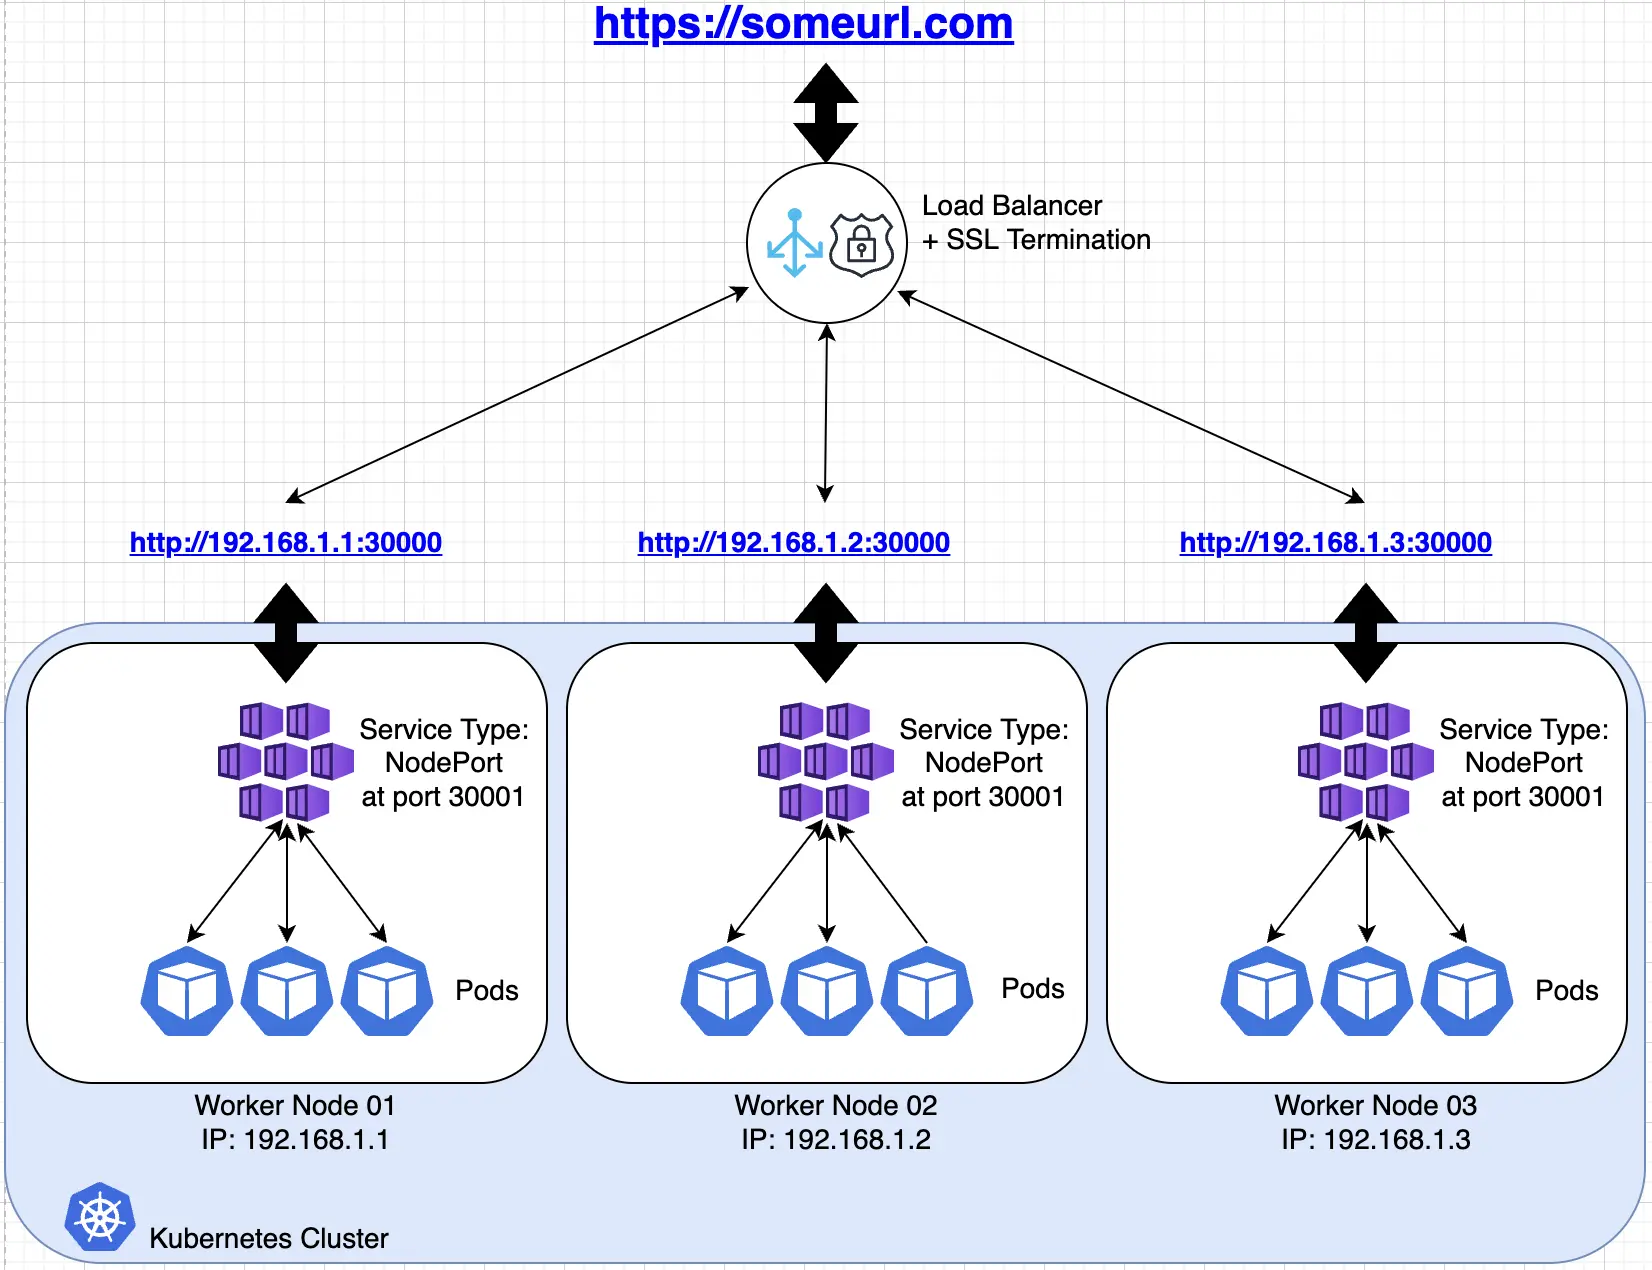 The same diagram as above, but this time all three IP address have arrows pointing bidirectionally to a single circle, labeled Load Balancer + SSL Termination. This circle points to a single URL, “https://someurl.com”.